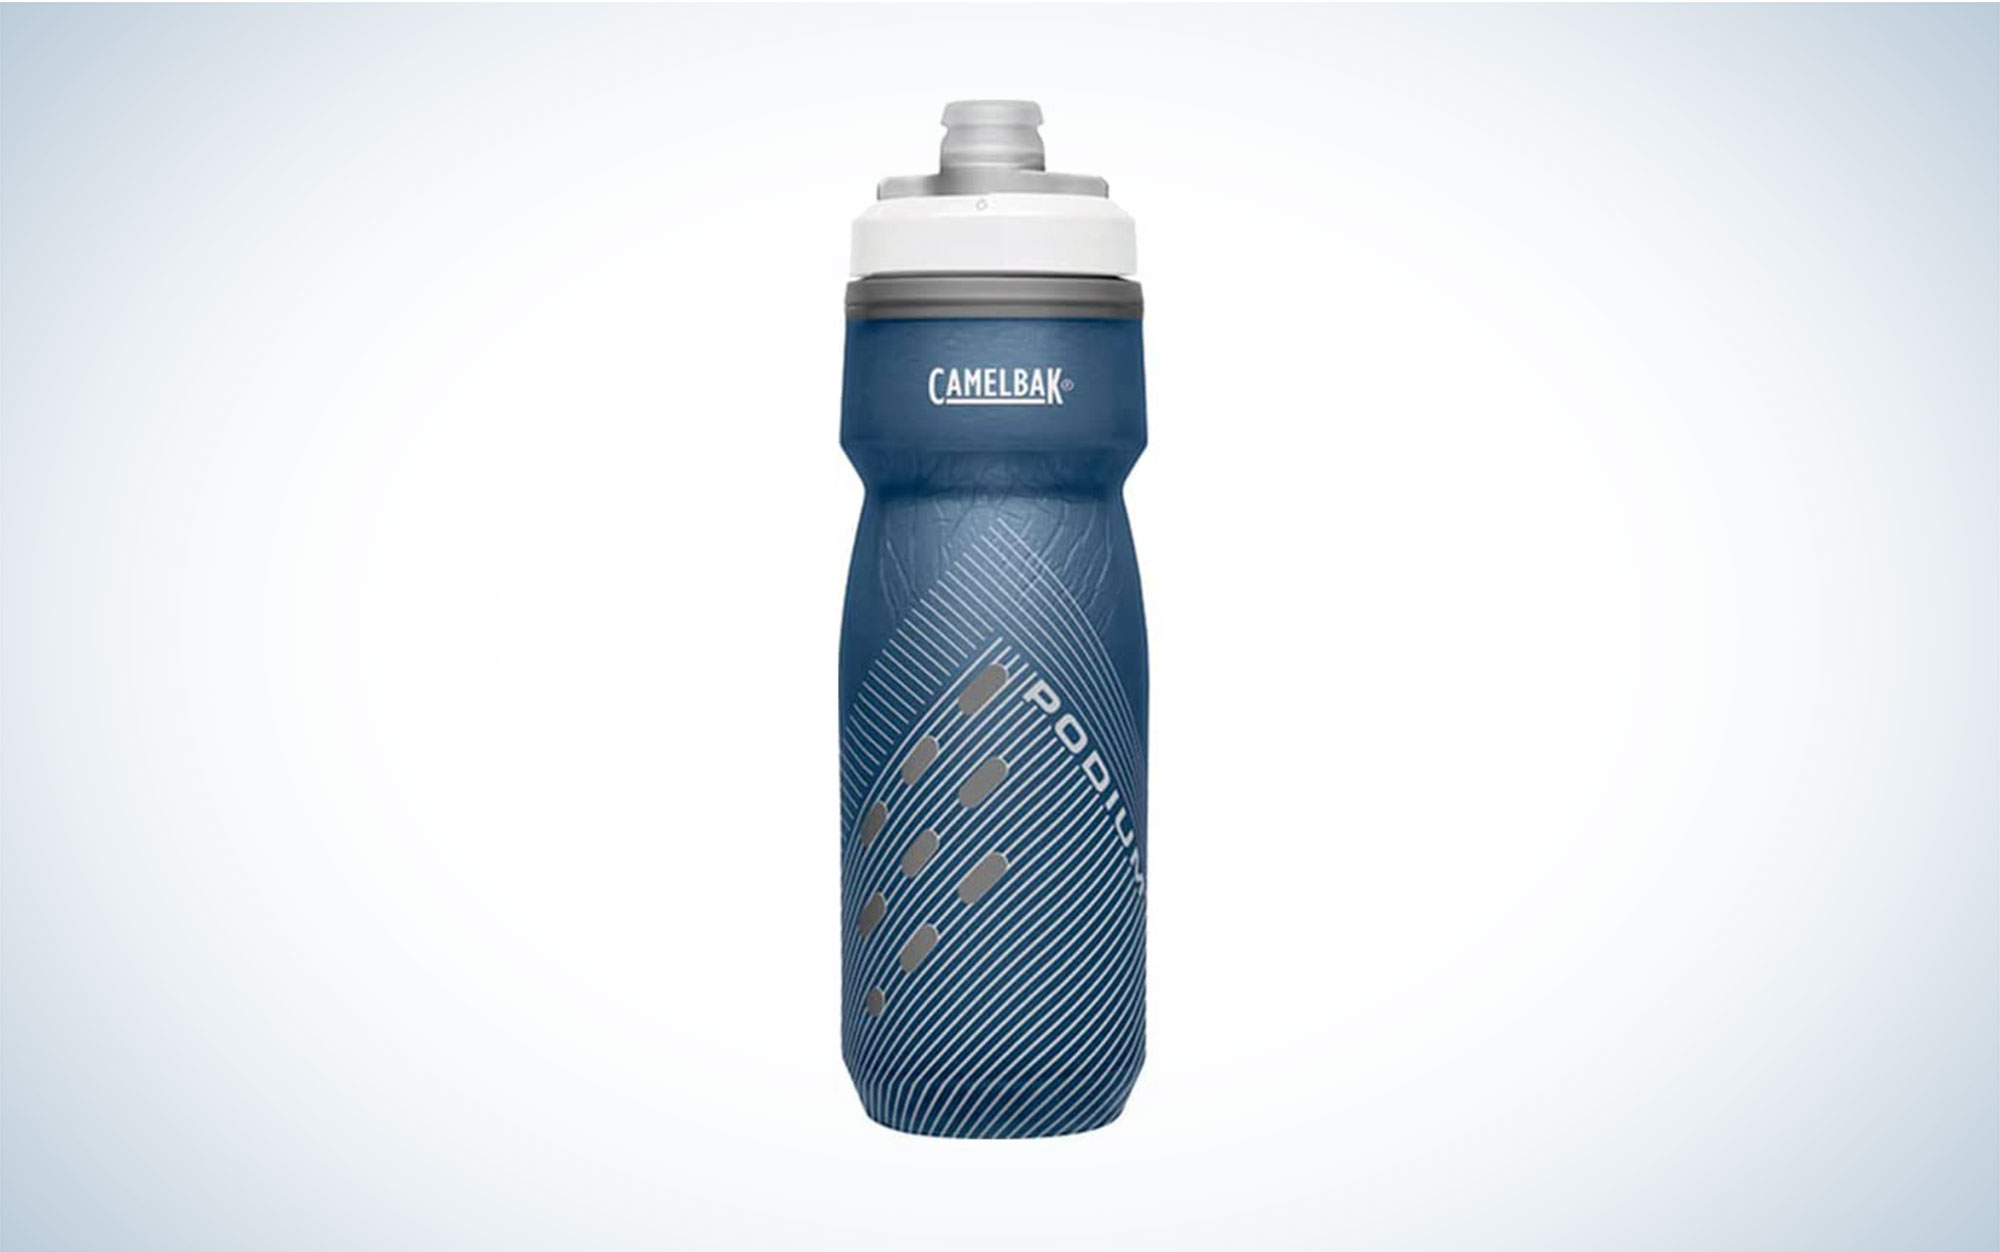 Camelbak Podium Chill insulated water bottle in blue